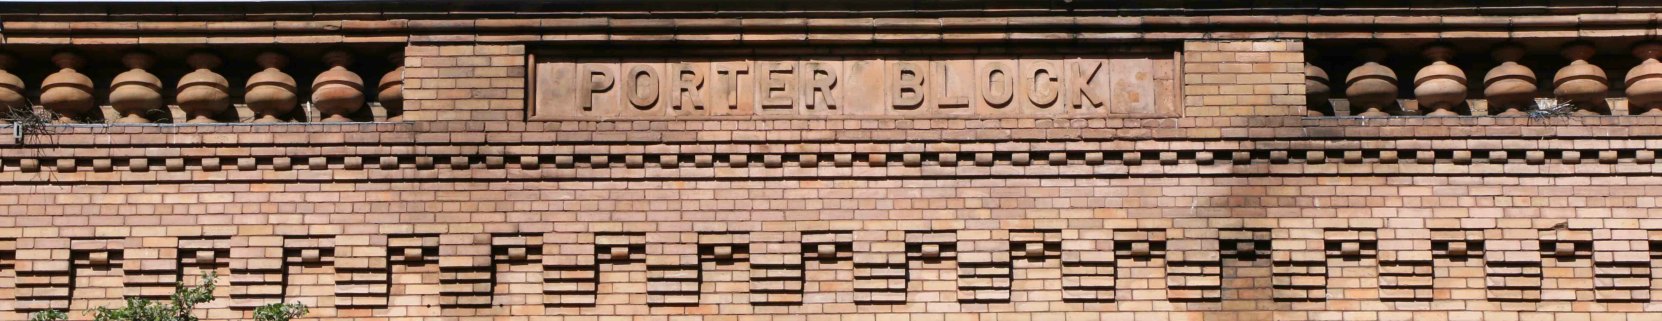 Our web header photo for the Porter Block at 1402-1406 Douglas Street shows the brickwork at the building's cornice.